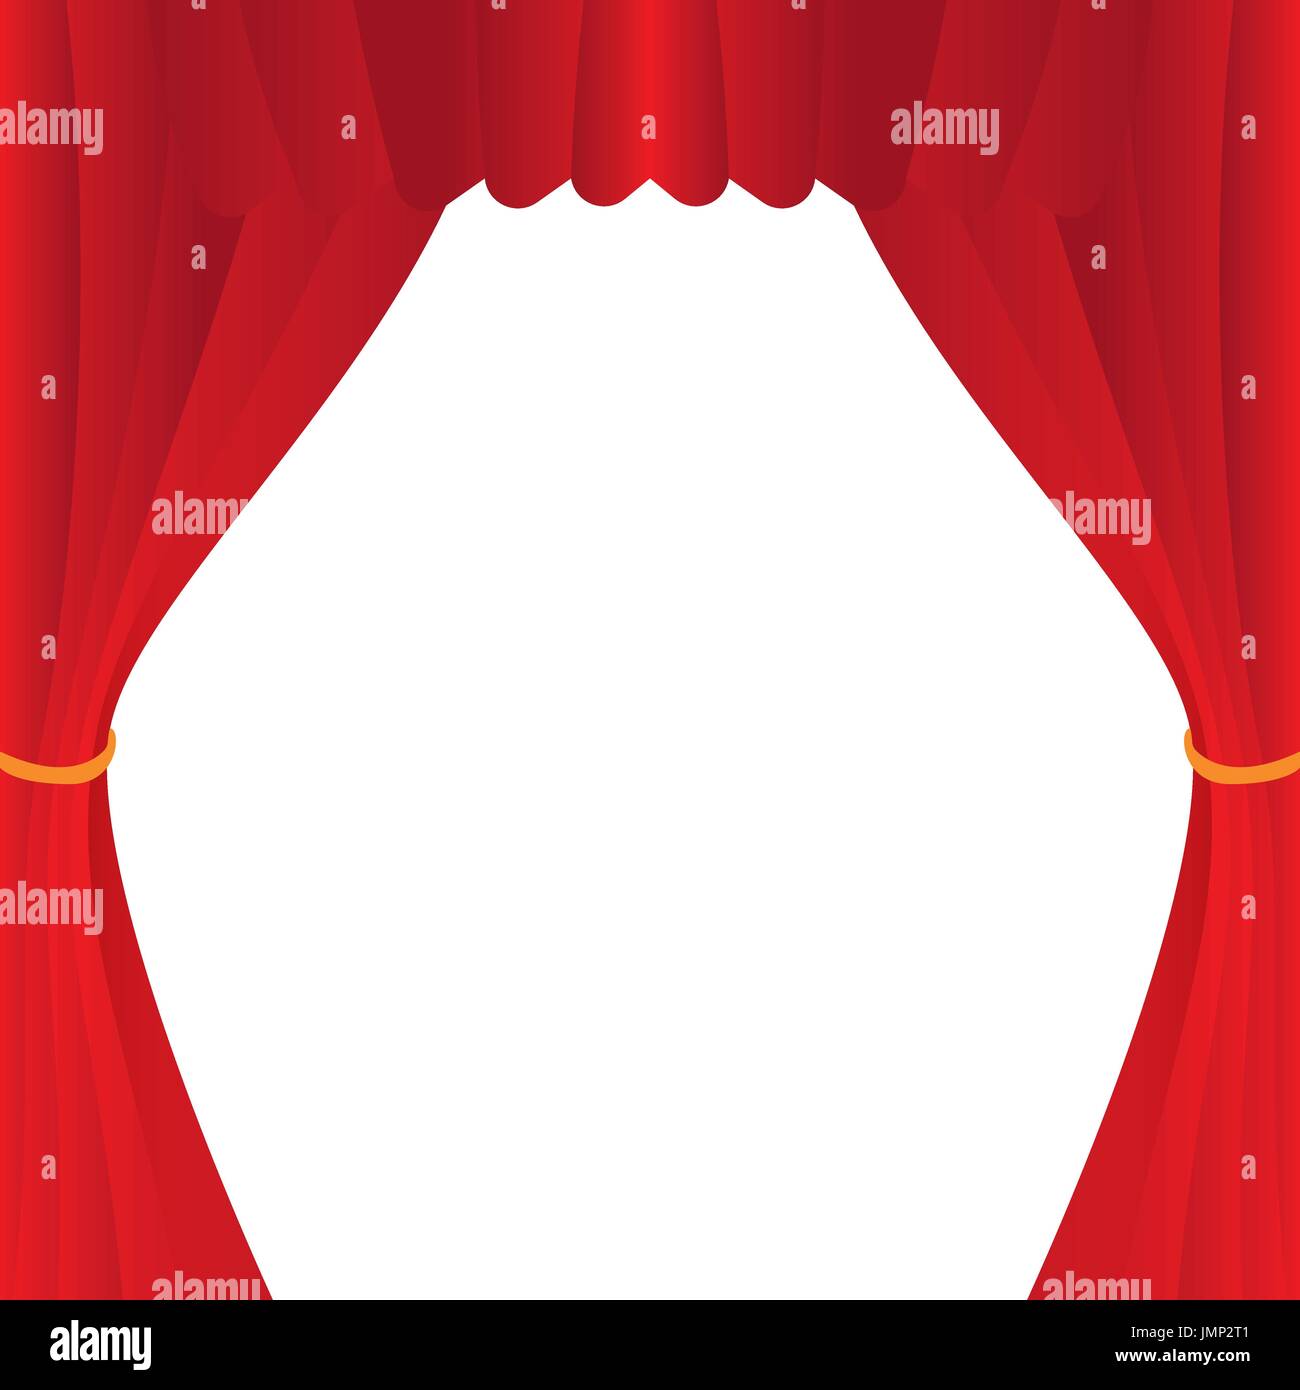 Illustration Red Curtain for the creative use in graphic design Stock Vector